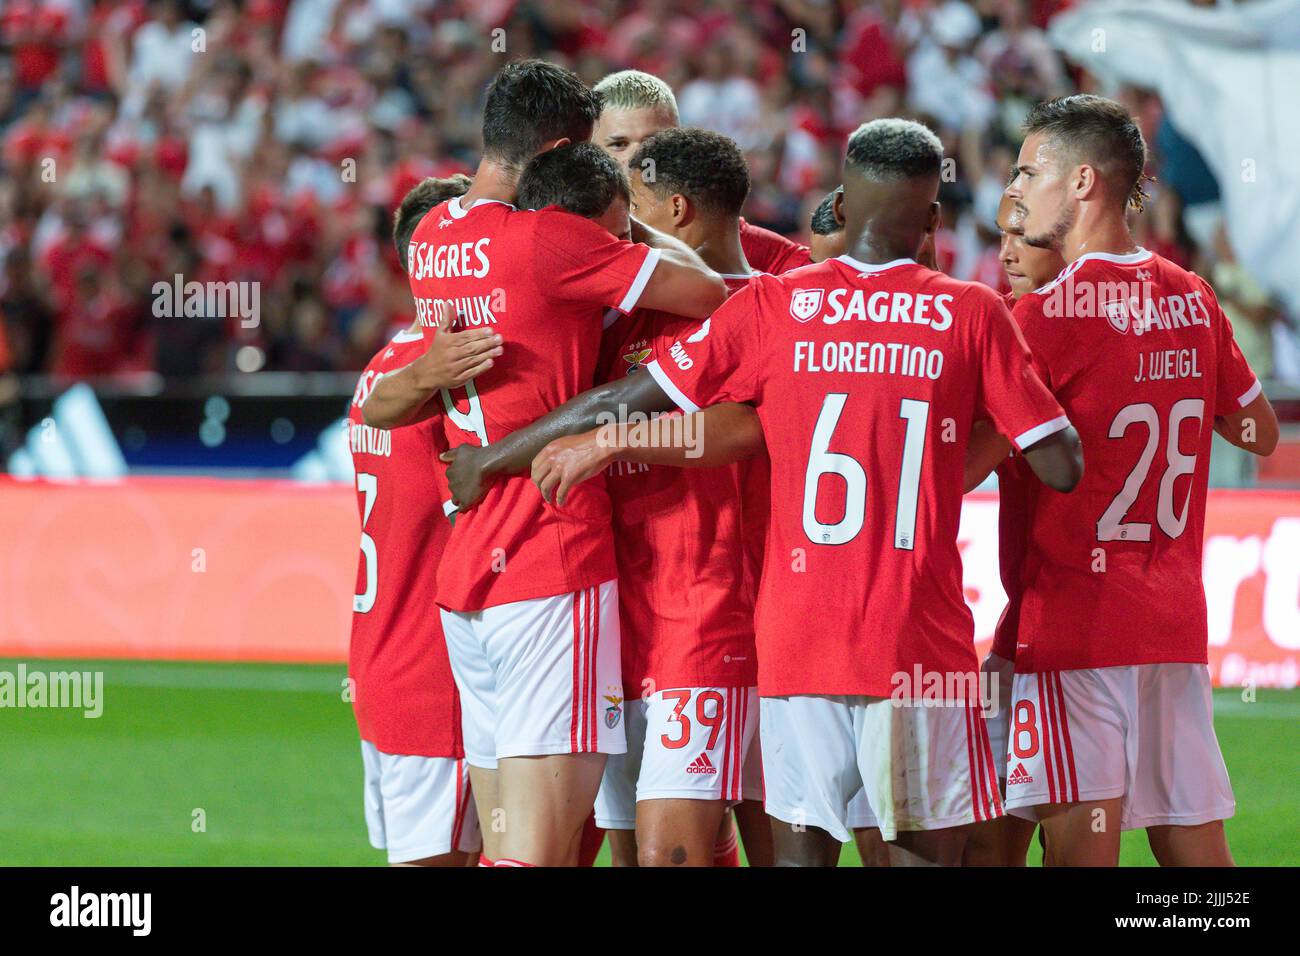 Lisbon, Portugal. July 26, 2022.  Benfica's forward from Portugal Henrique Araujo (39) celebrating with teammates after scoring a goal during the friendly game between SL Benfica vs Newcastle United FC Credit: Alexandre de Sousa/Alamy Live News Stock Photo